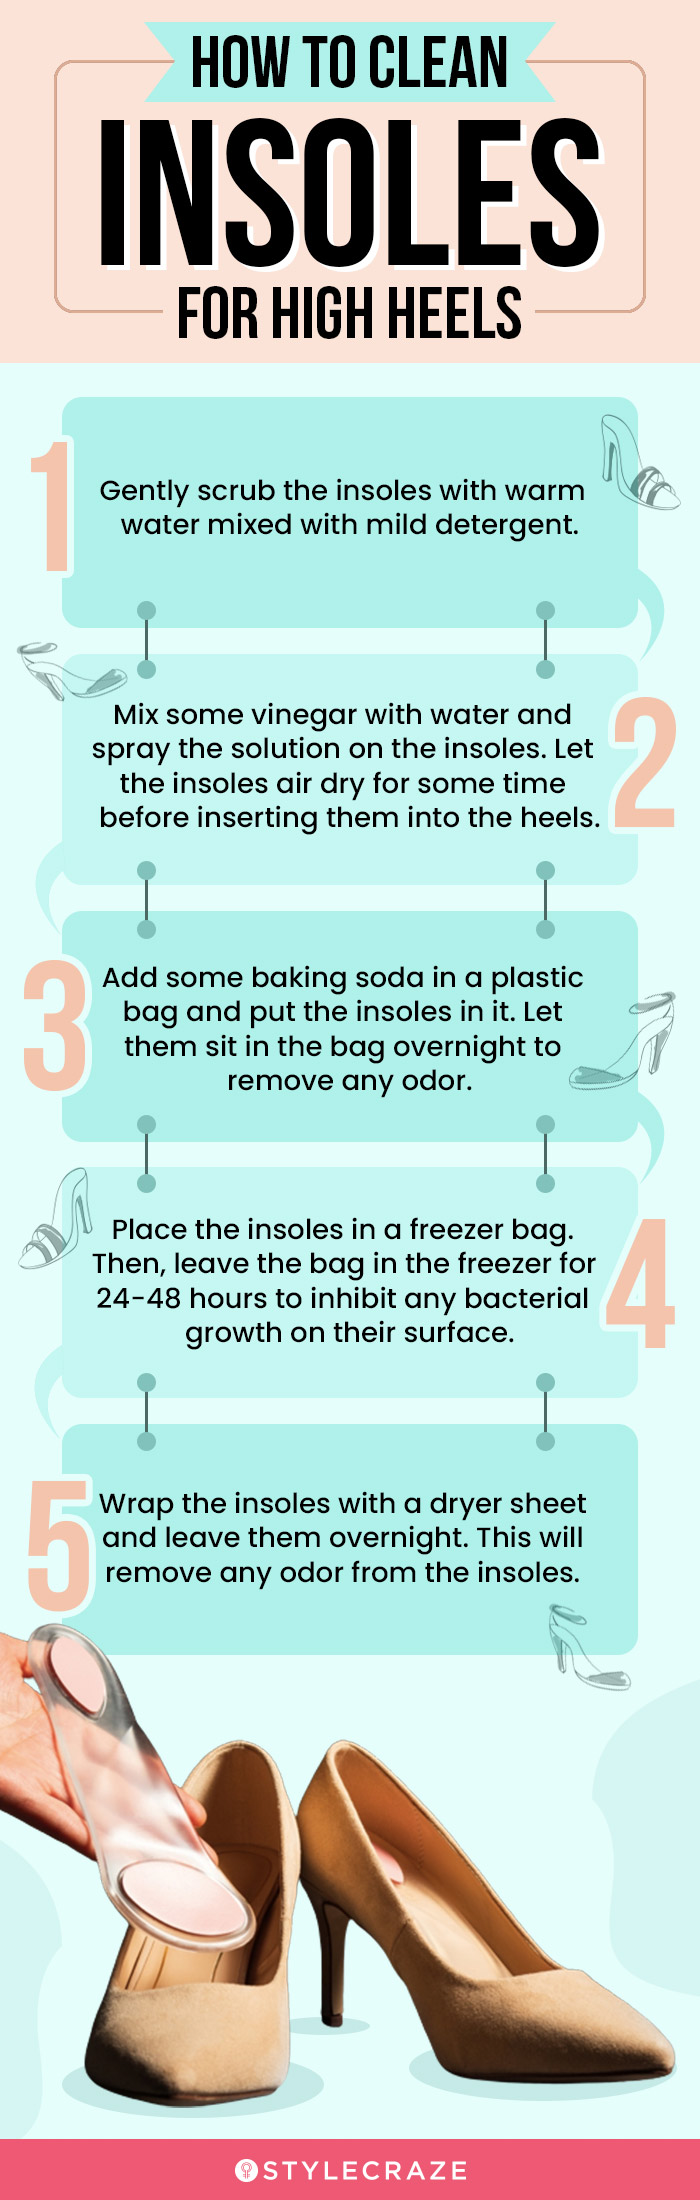 How To Clean Insoles For High Heels (infographic)